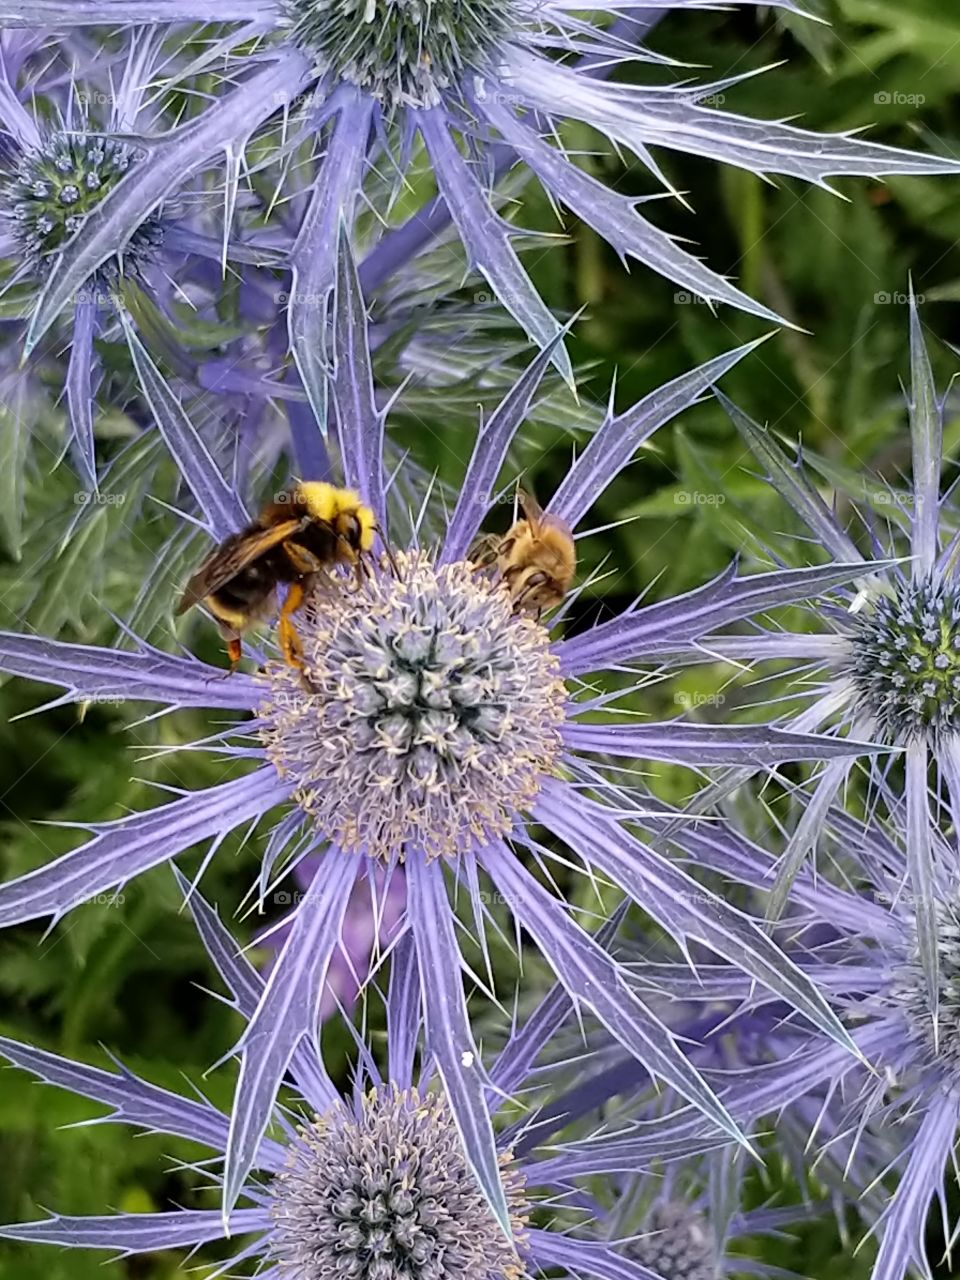 Bees pollinating a purple flower